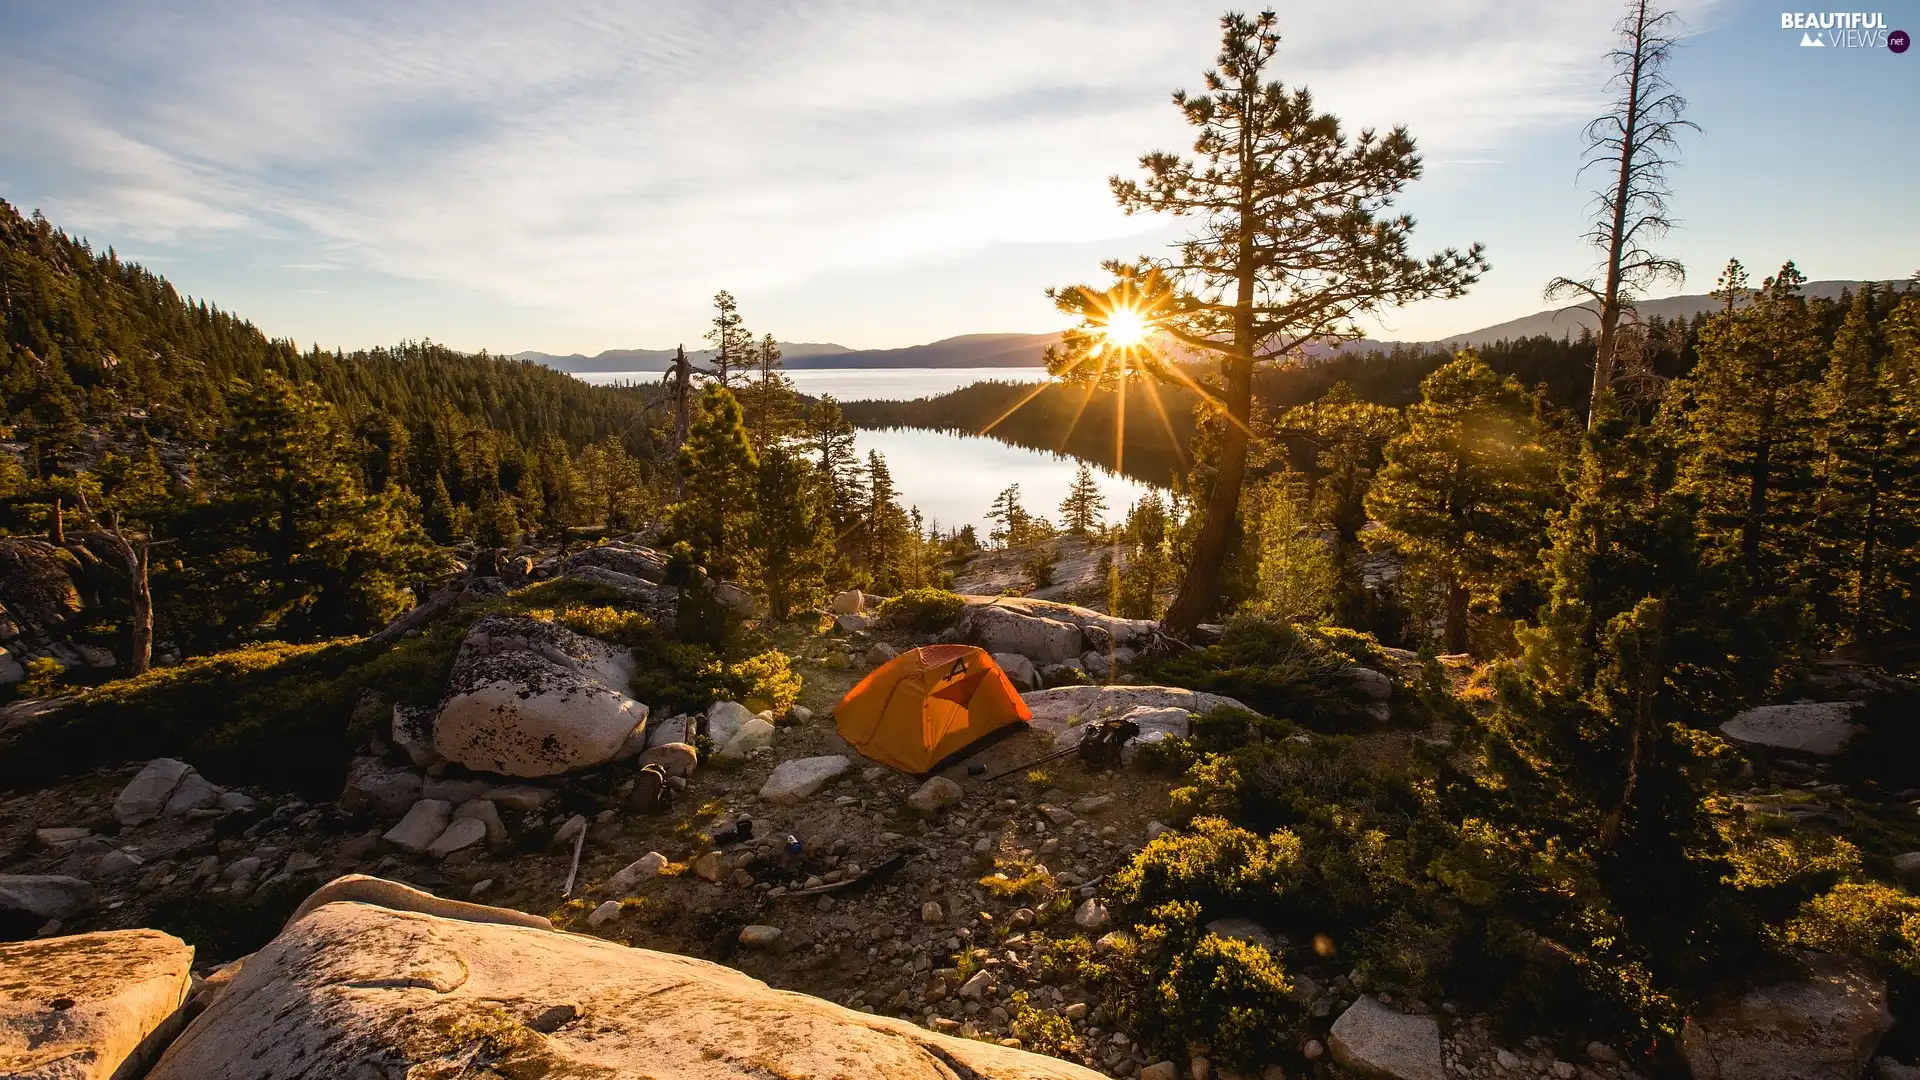 lakes, rocks, rays of the Sun, trees, Tent, forest, Mountains, viewes